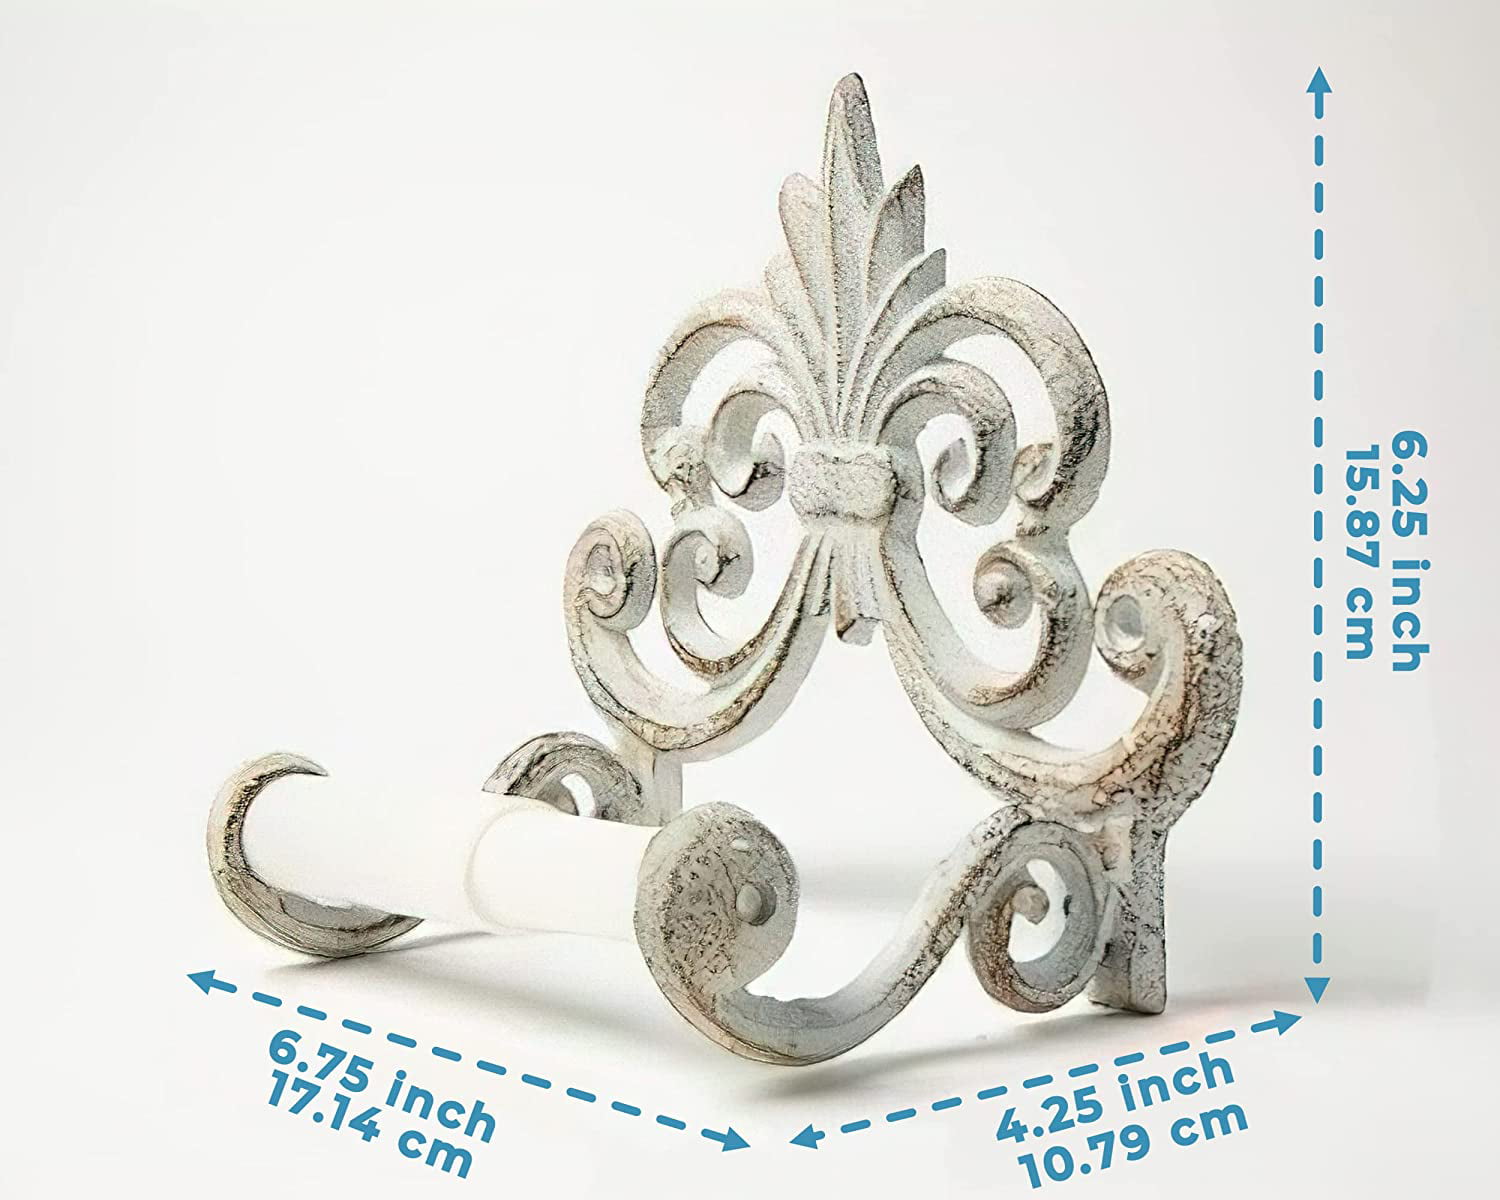 Cast Iron Wall Mounted Toilet Tissue Holder Fleur De Lis Cast Iron Toilet Paper Roll holder European Vintage Design Antique White With Screws And Anchors by Comfify 7.9x4.3x6.3